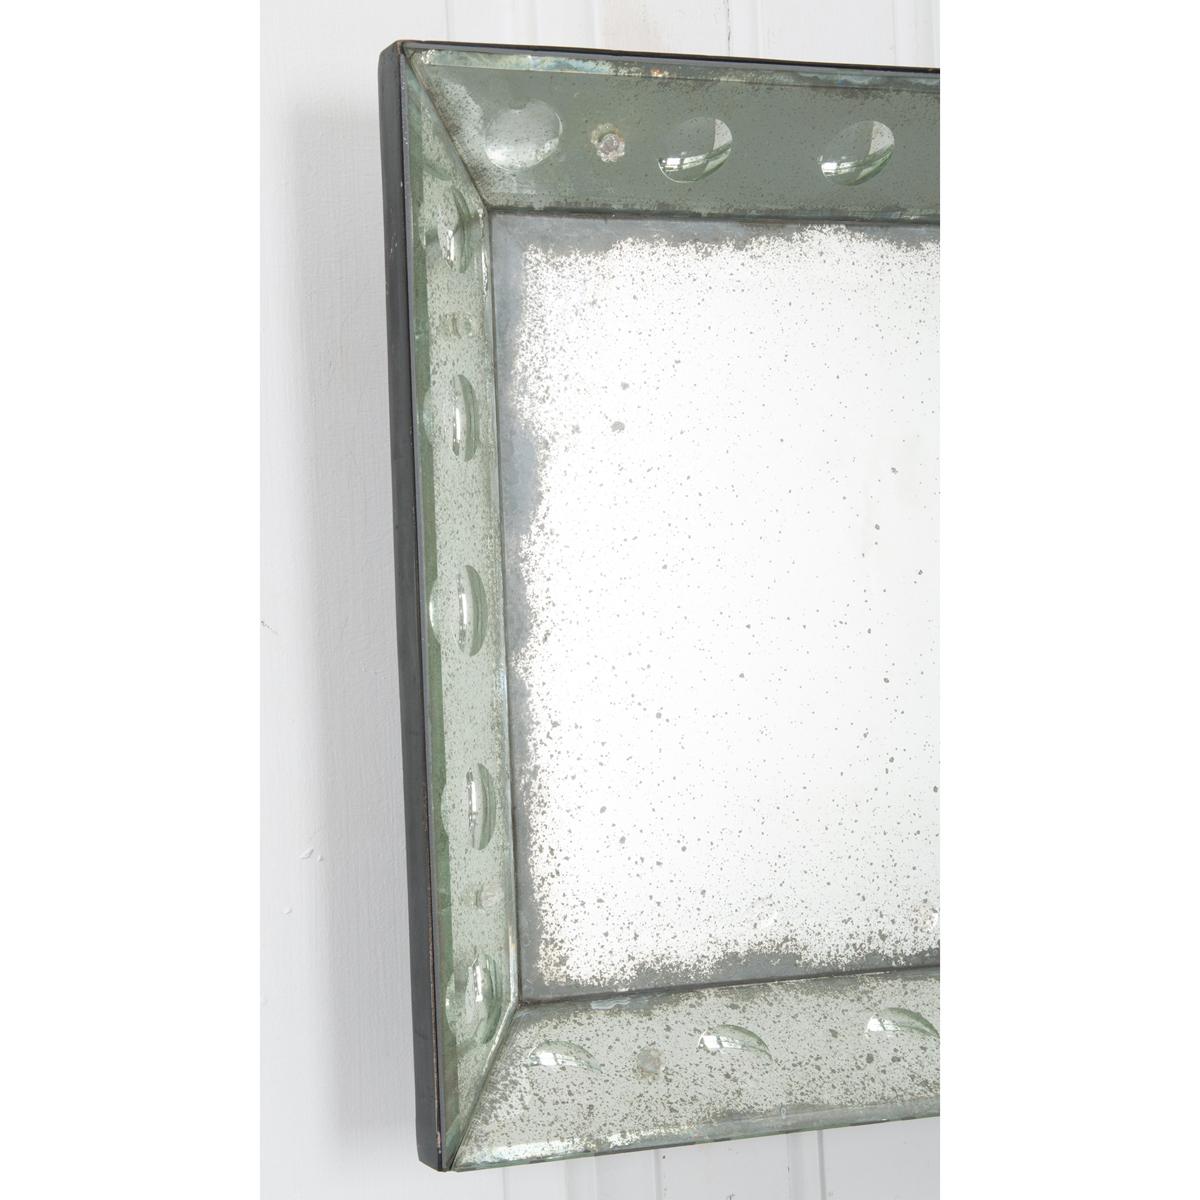 This reproduction mirror imitates the look of a vintage mirror with a few extra details. Twenty bullseye bubbles surround the main mirror plate with small glass flowers in between. Perfectly square, adding this mirror to your existing decor will be